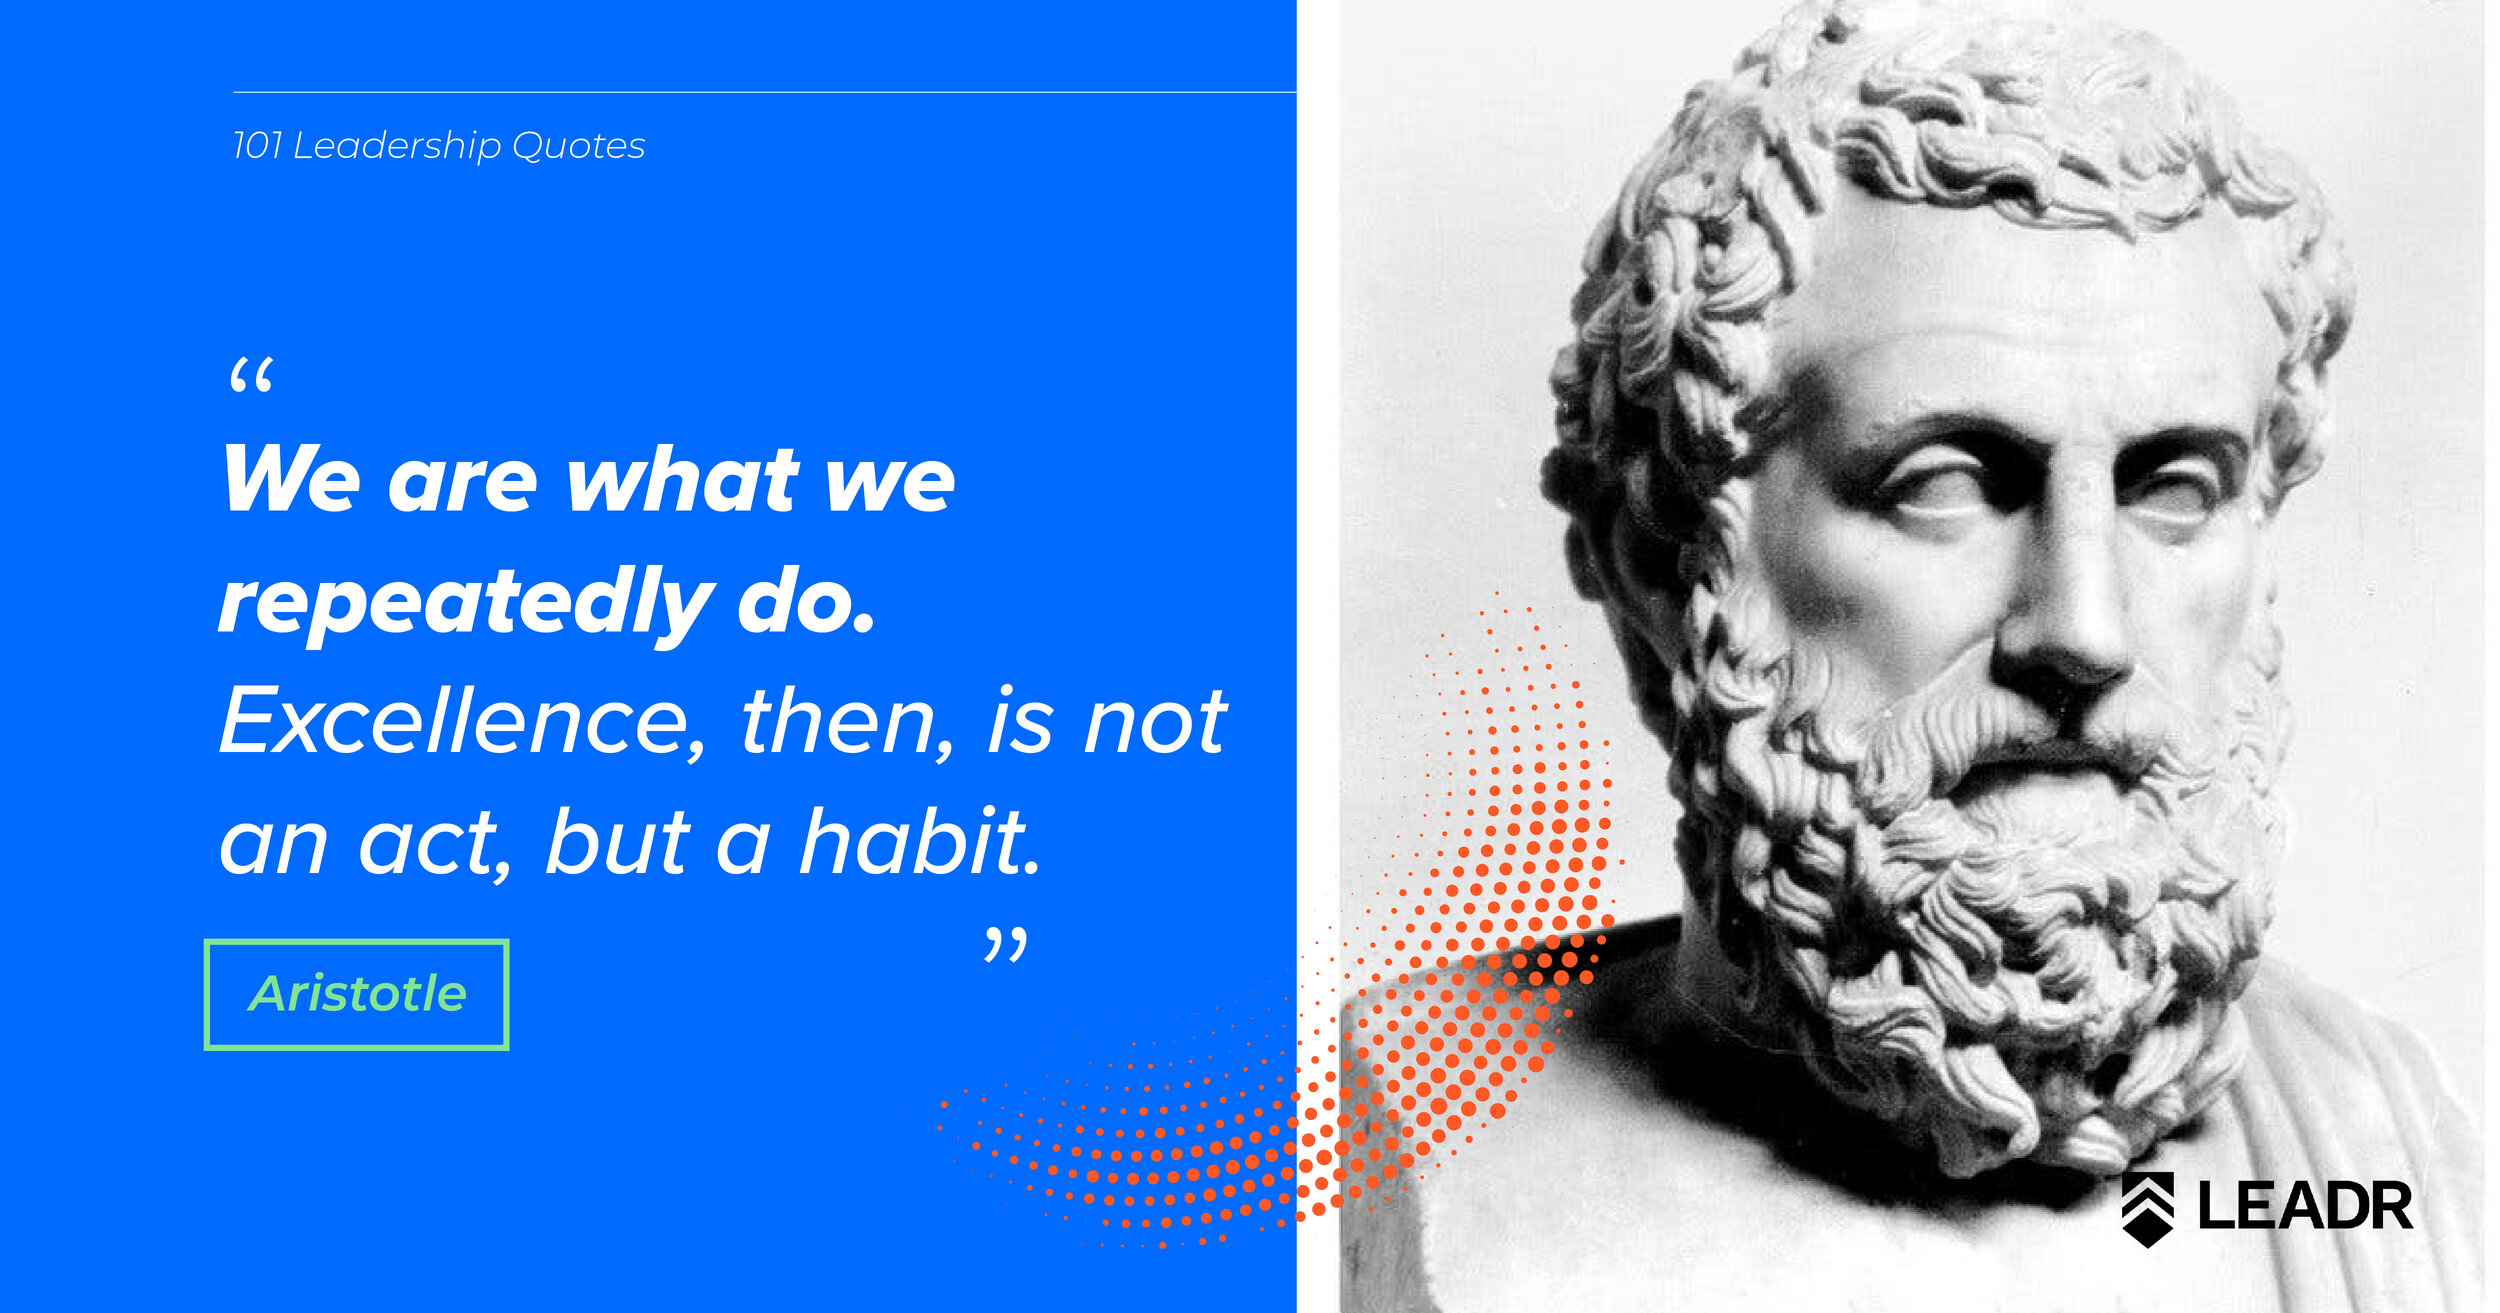 Royalty free downloadable leadership quotes - Aristotle